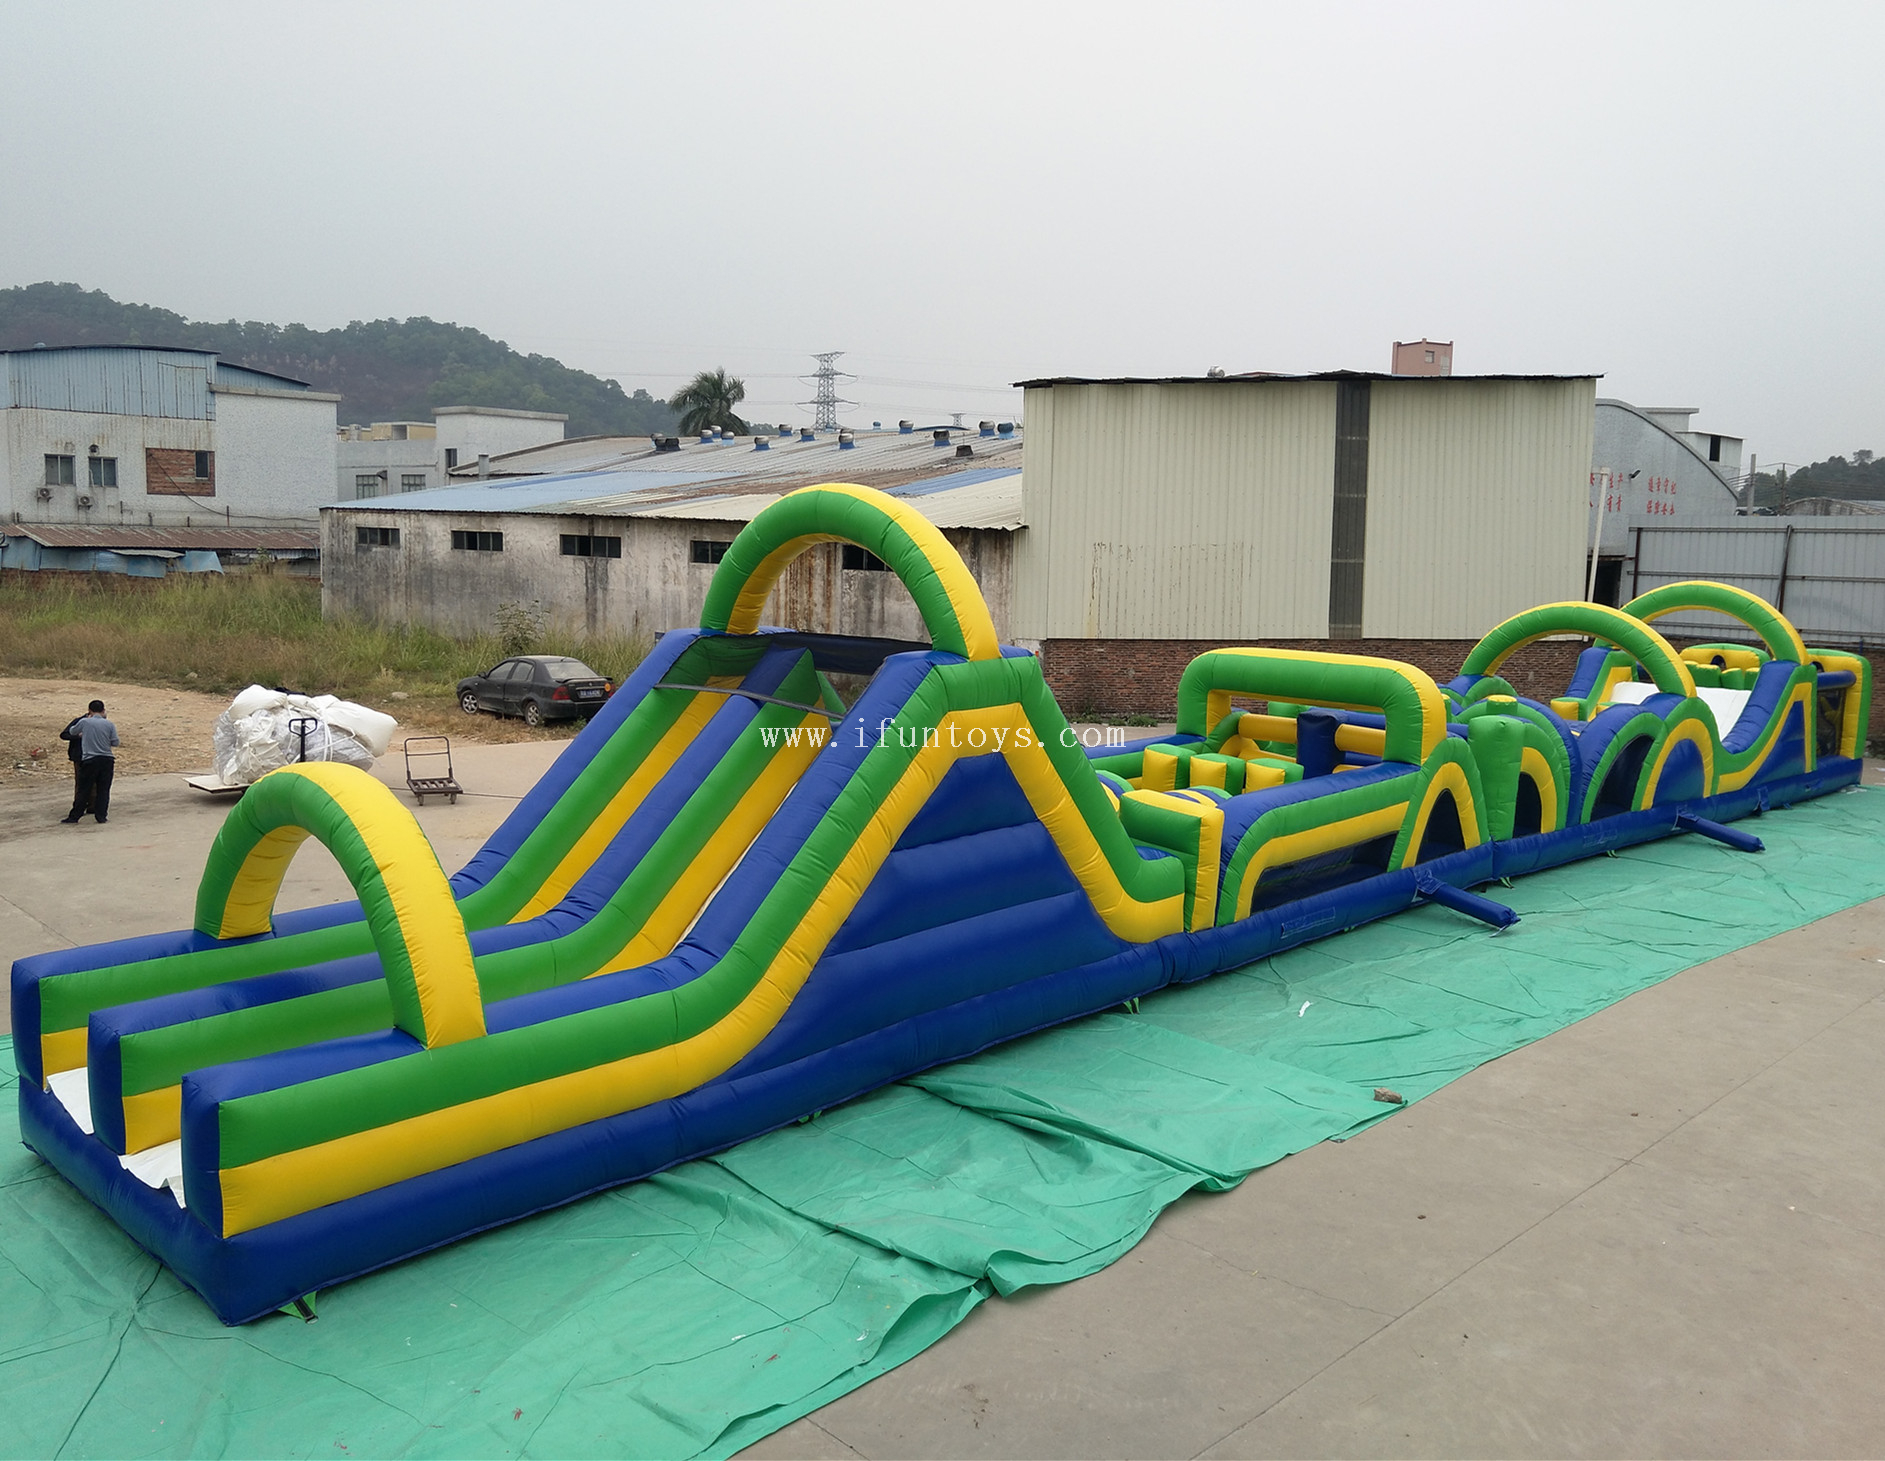 Cheap Radical Run inflatable obstacle course with climbing wall/inflatable tunnel obstacle course for sport game